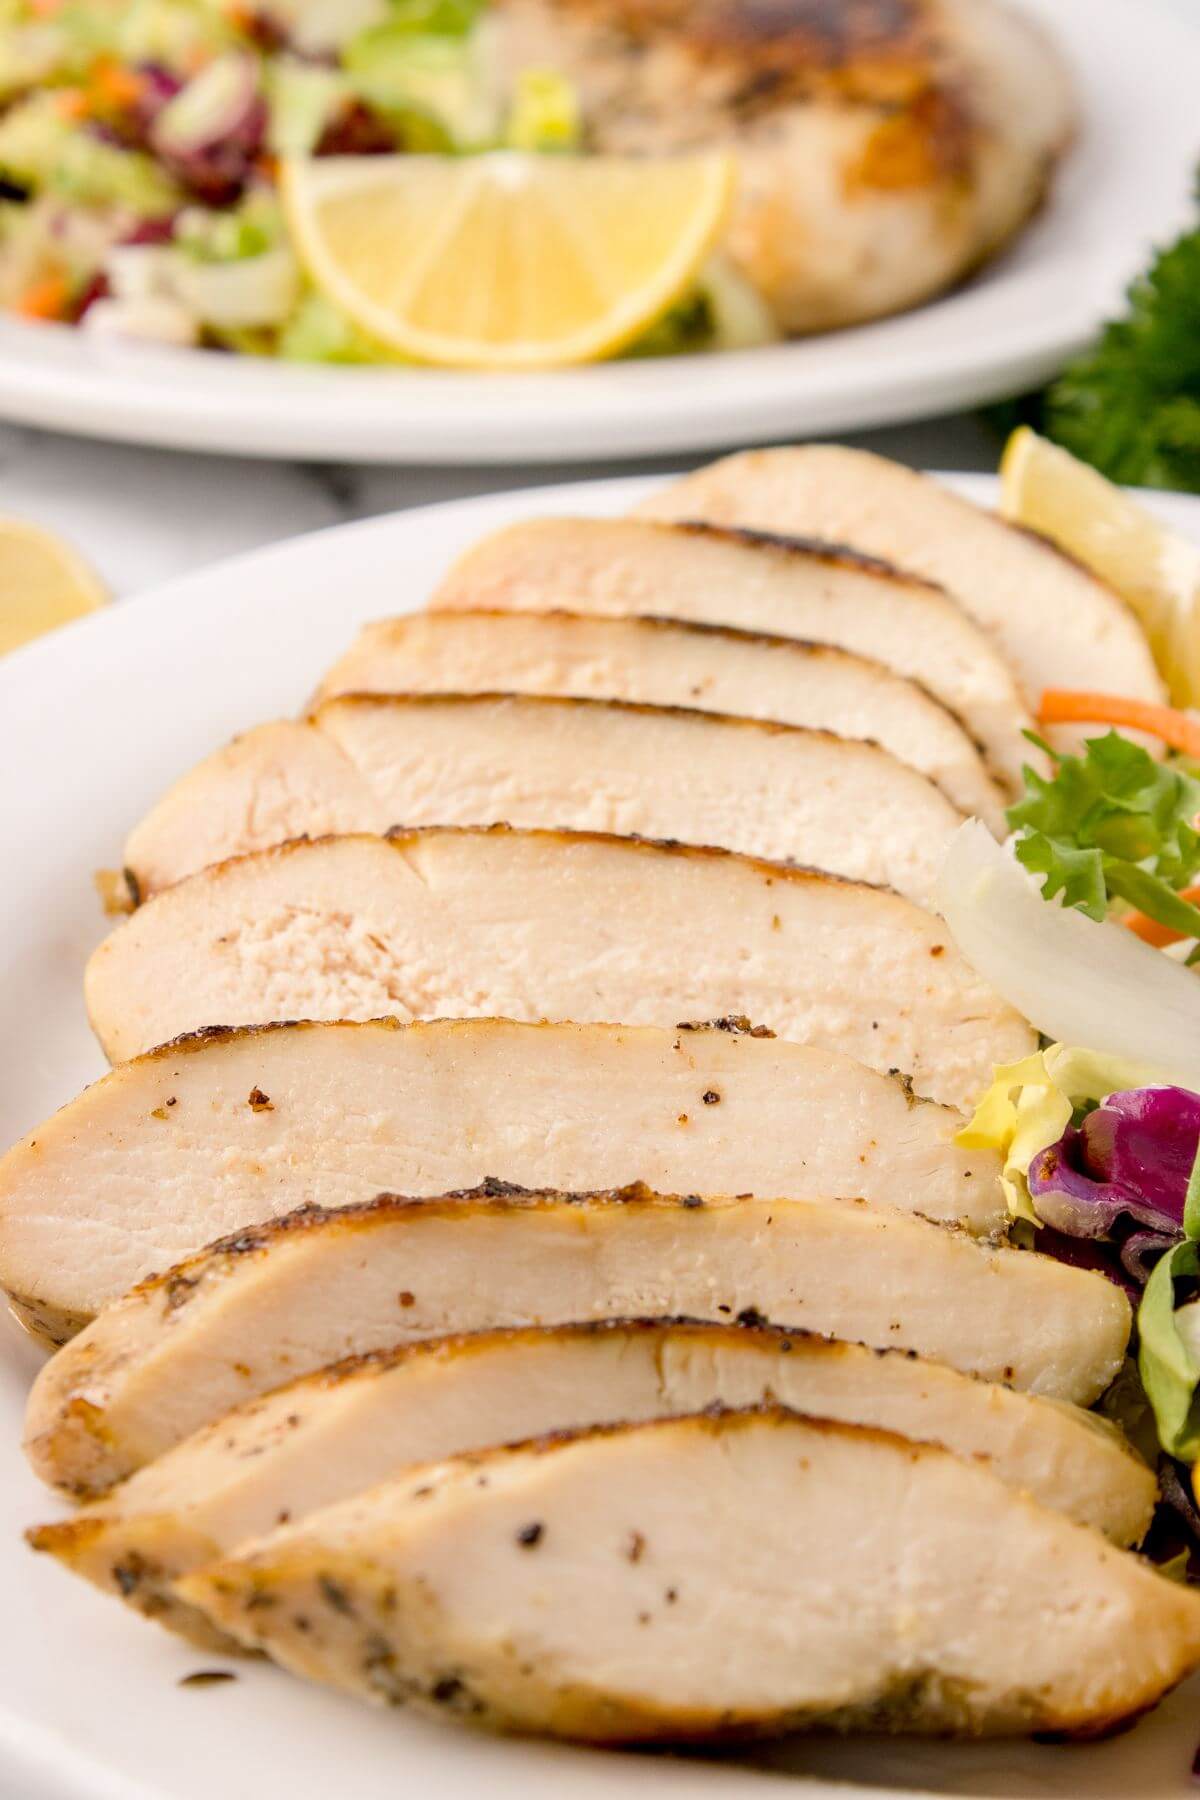 Chicken slices are spread out on plate overlapping each other next to salad.